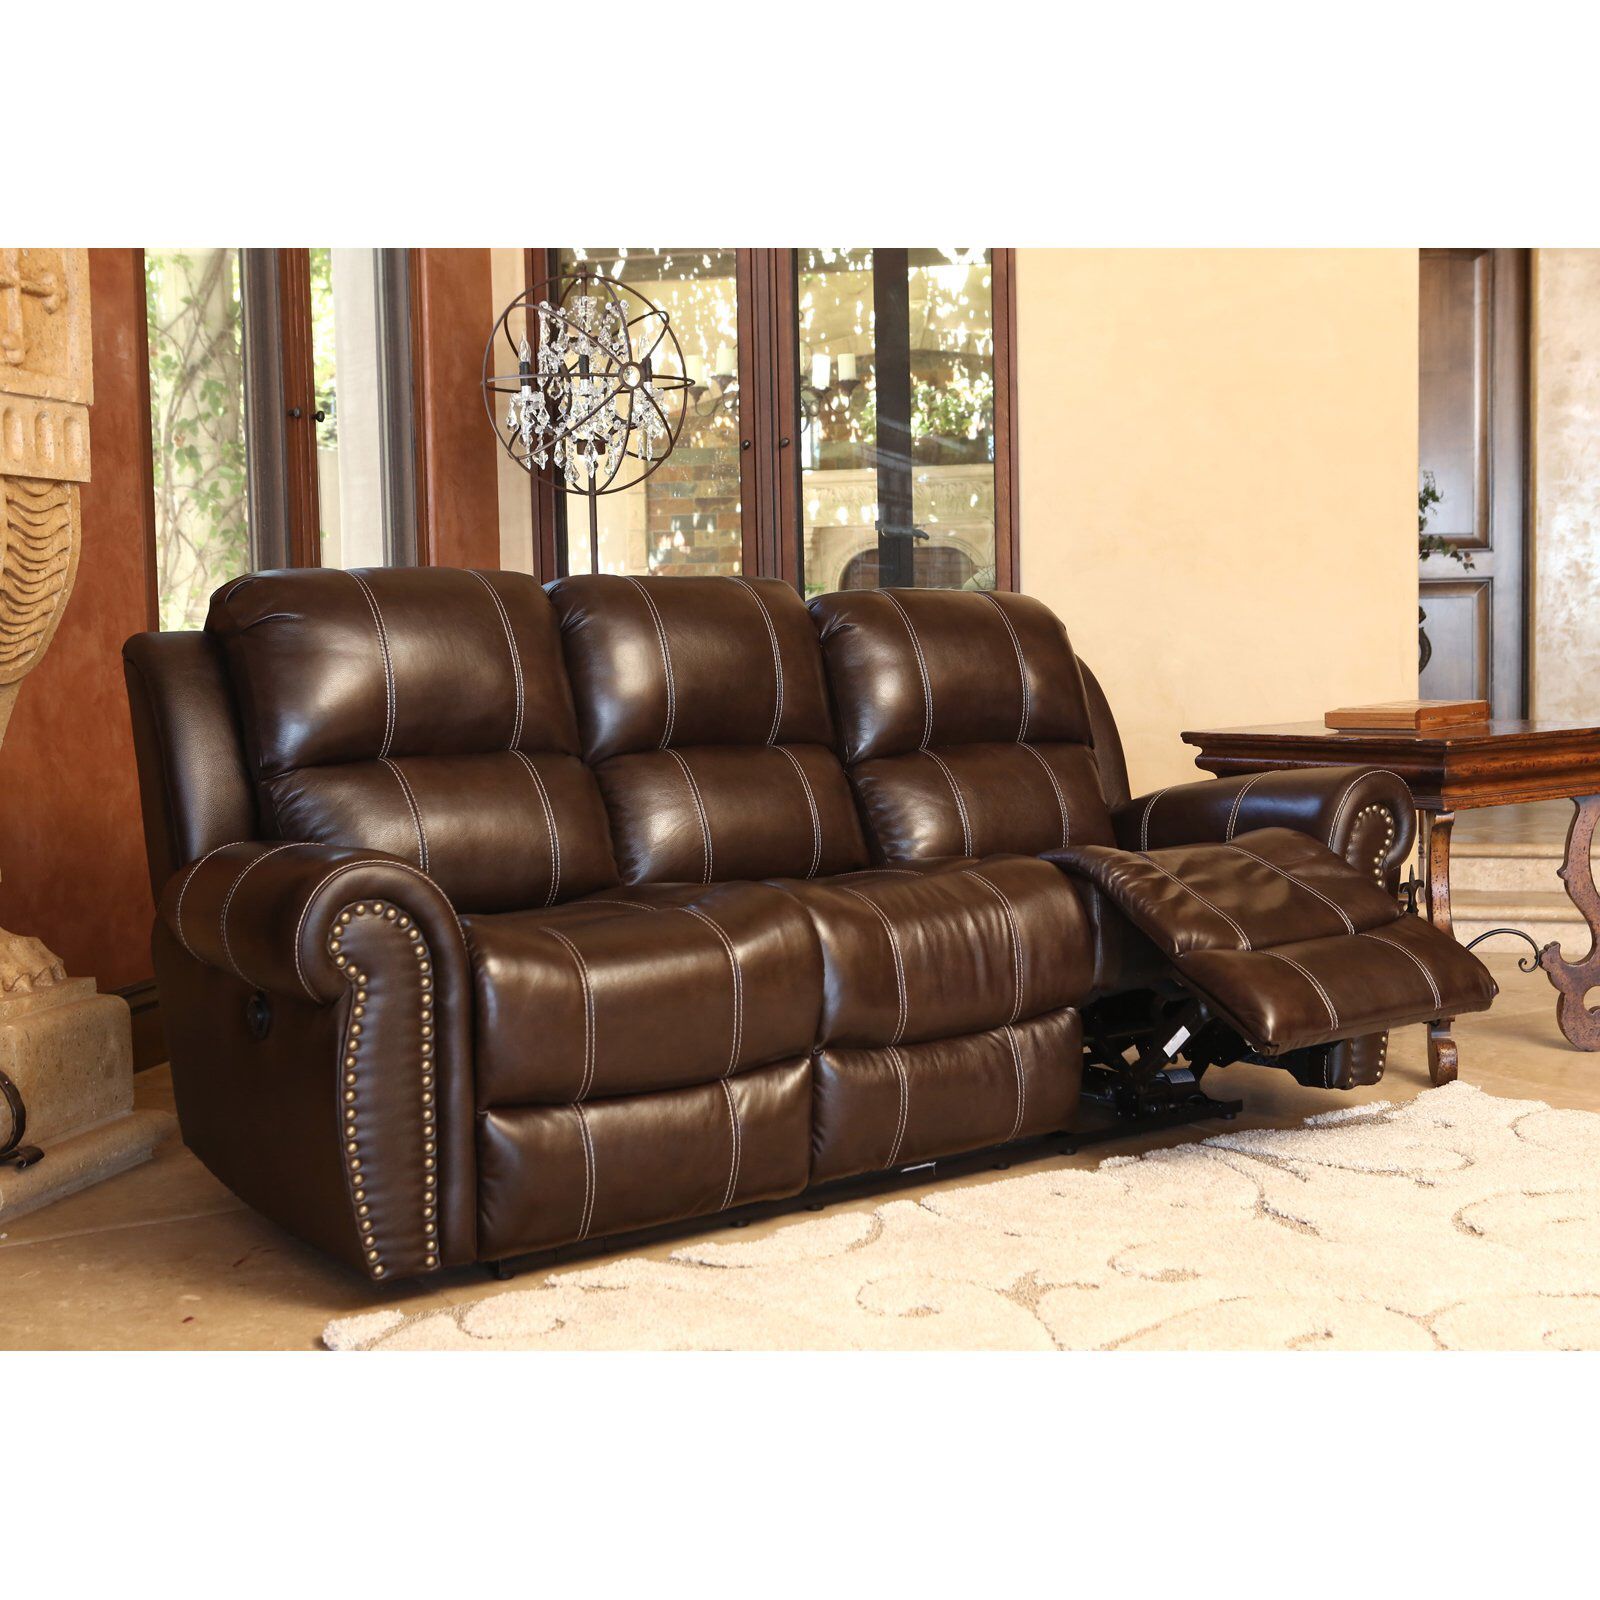 Real genuine Italian leather power recliner sofa loveseat and chair brown